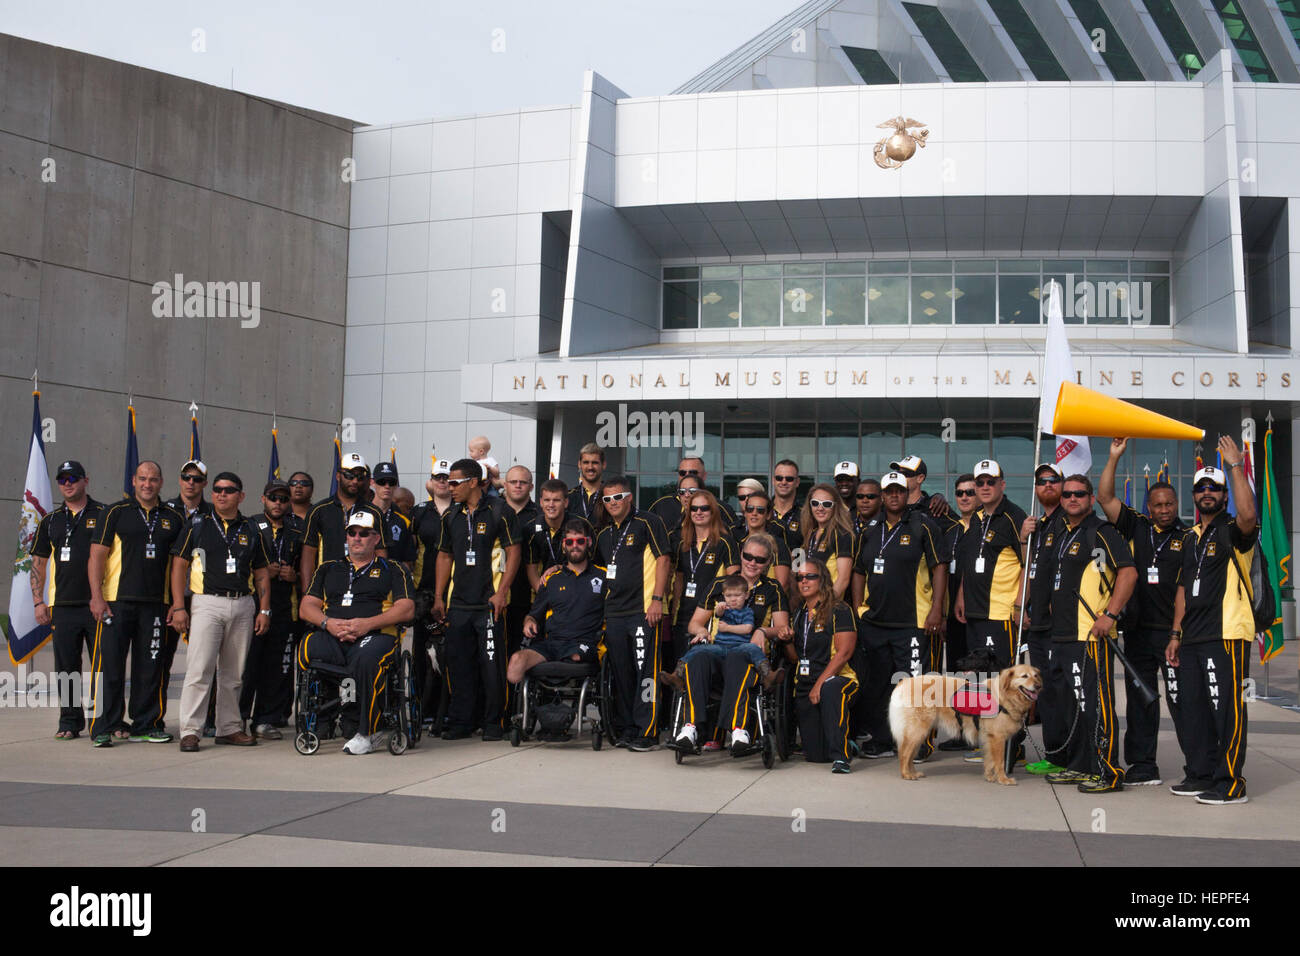 U.S. Army veteran and active duty athletes pose for a group photo before the opening ceremony for the 2015 Department of Defense Warrior Games at the National Museum of the Marine Corps, Triangle, Virginia. The 2015 DOD Warrior Games are held at Marine Corps Base, Quantico, Virginia, June 19-28. The 2015 DOD Warrior Games is an adaptive sports competition for wounded, ill and injured service members and veterans. Approximately 250 athletes, representing teams from the Army, Marine Corps, Navy, Air Force, Special Operations Command and the British Armed Forces will compete in archery, cycling,  Stock Photo